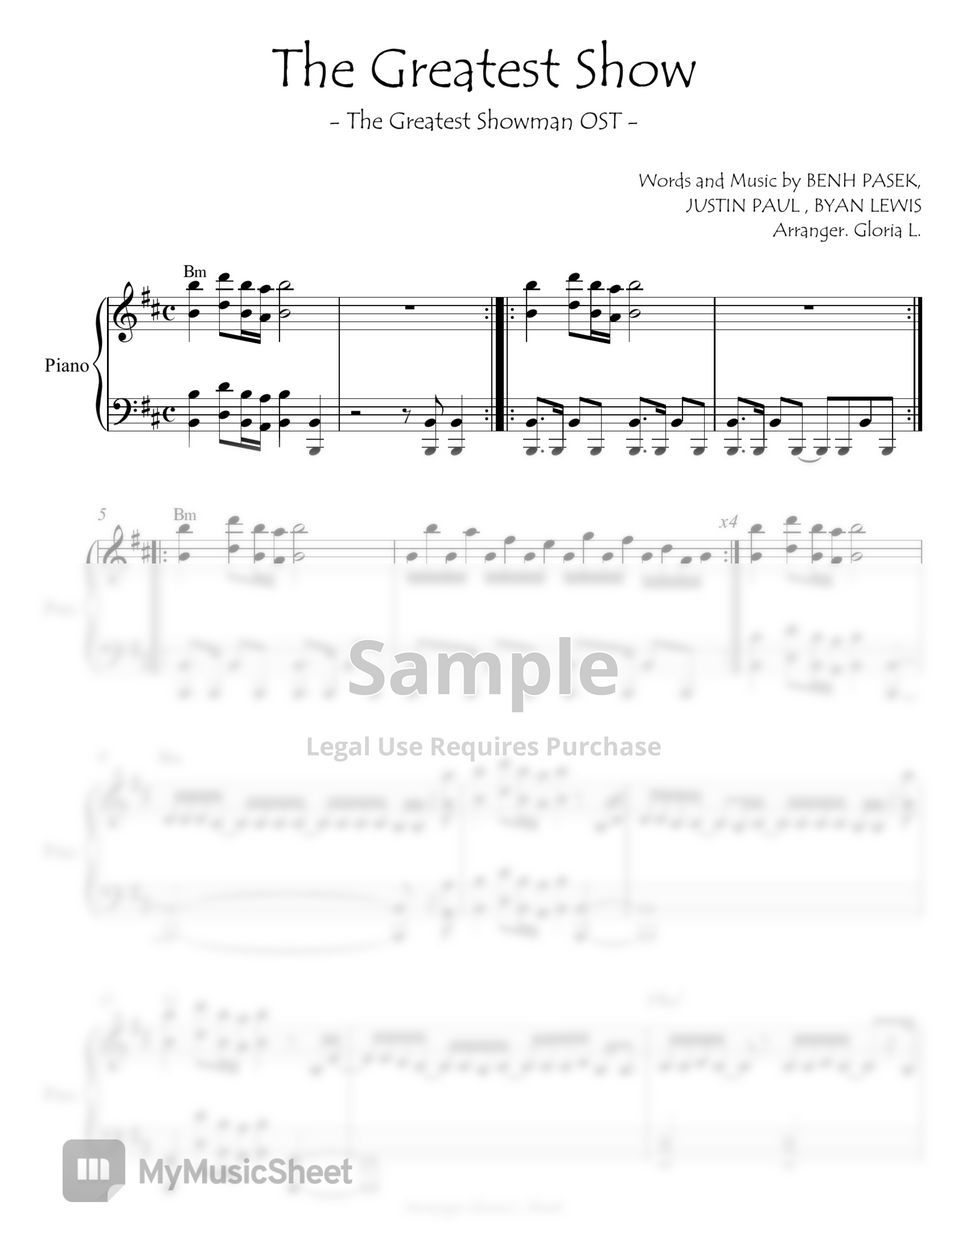 Hugh Jackman - The Greatest Show (The Greatest Showman OST) Piano Sheet by. Gloria L.